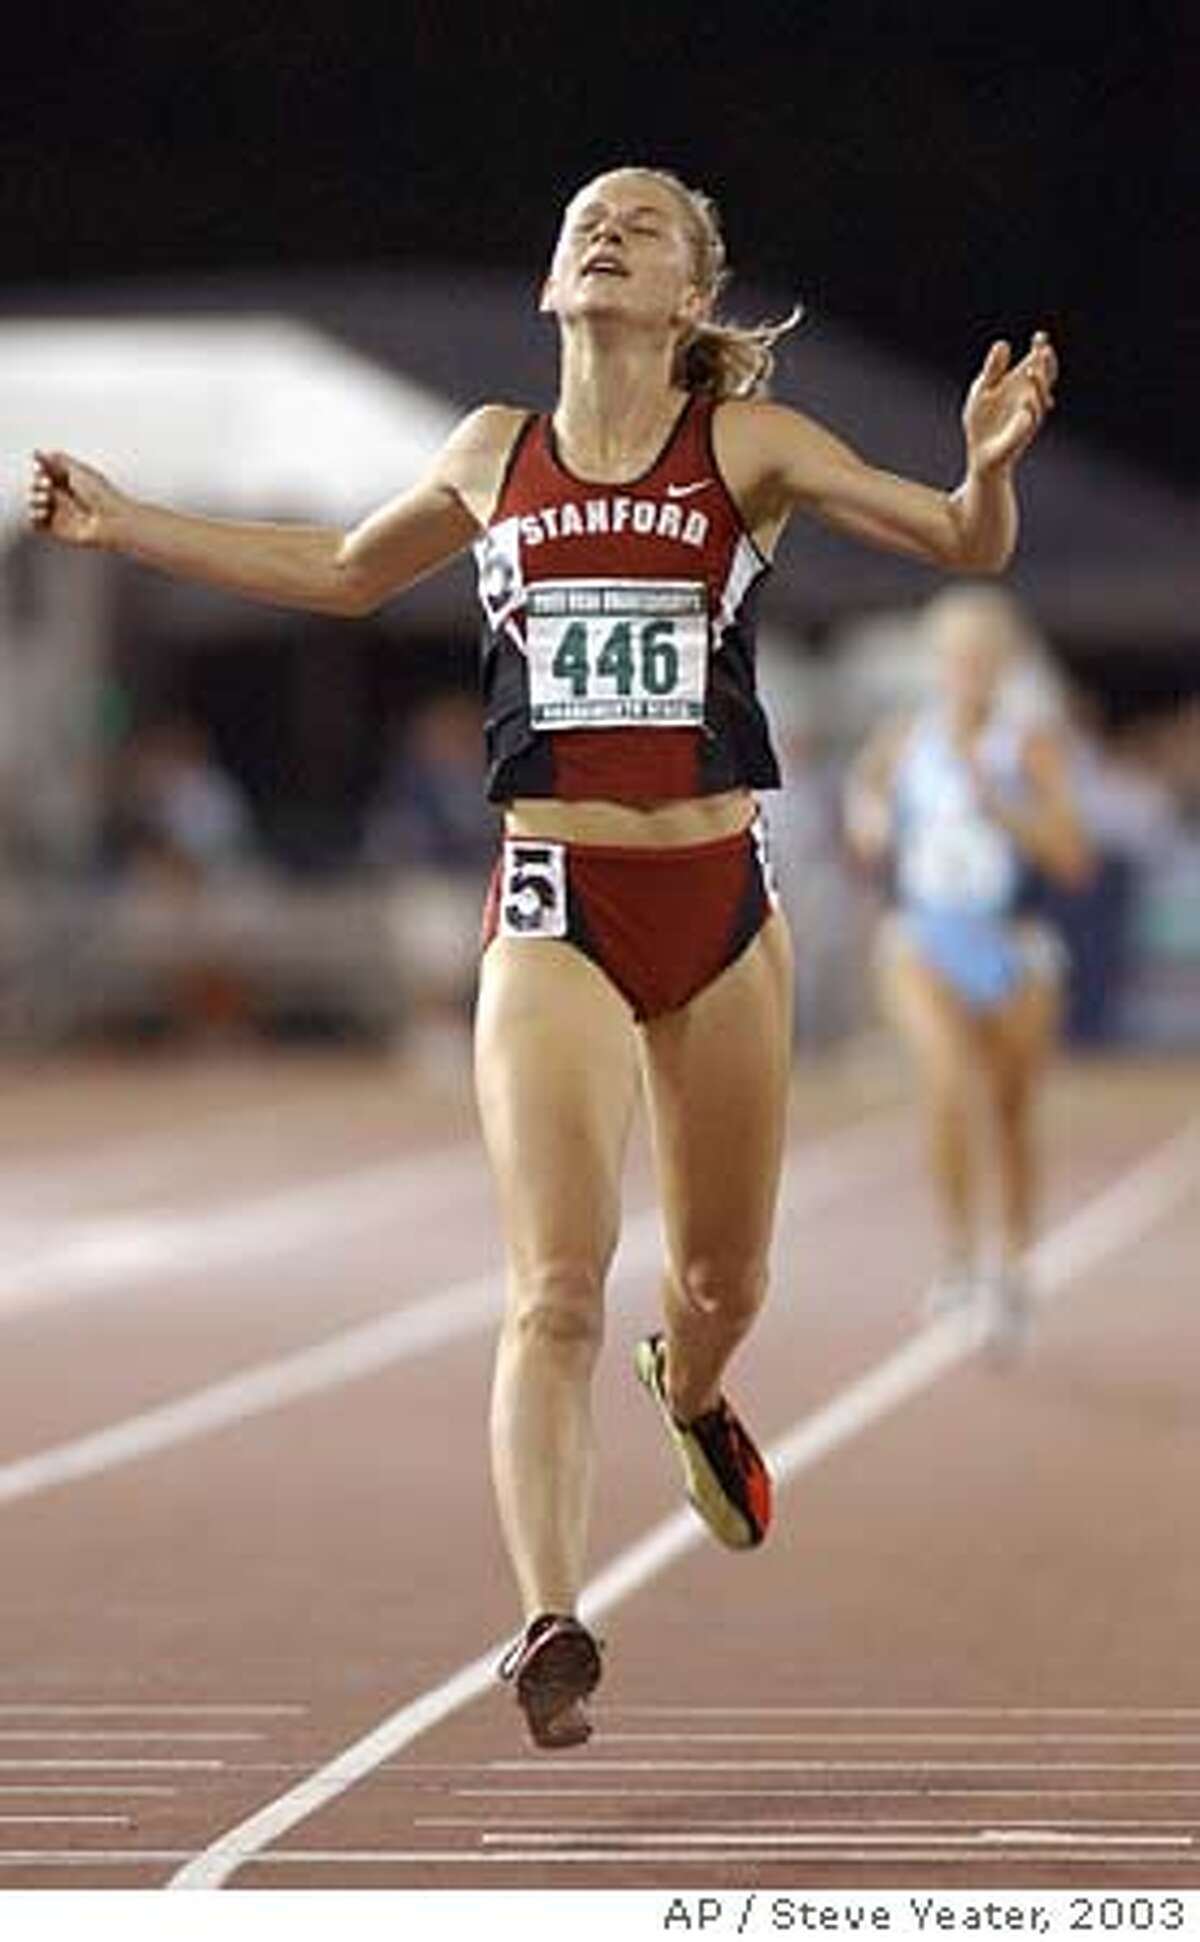 Stanford's Lauren Fleshman crosses the finish line to win the women's 5,000 meters with a time 15:24.06 during the NCAA track and field championships in Sacramento, Calif., Saturday, June 14, 2003. (AP Photo/Steve Yeater) CAT